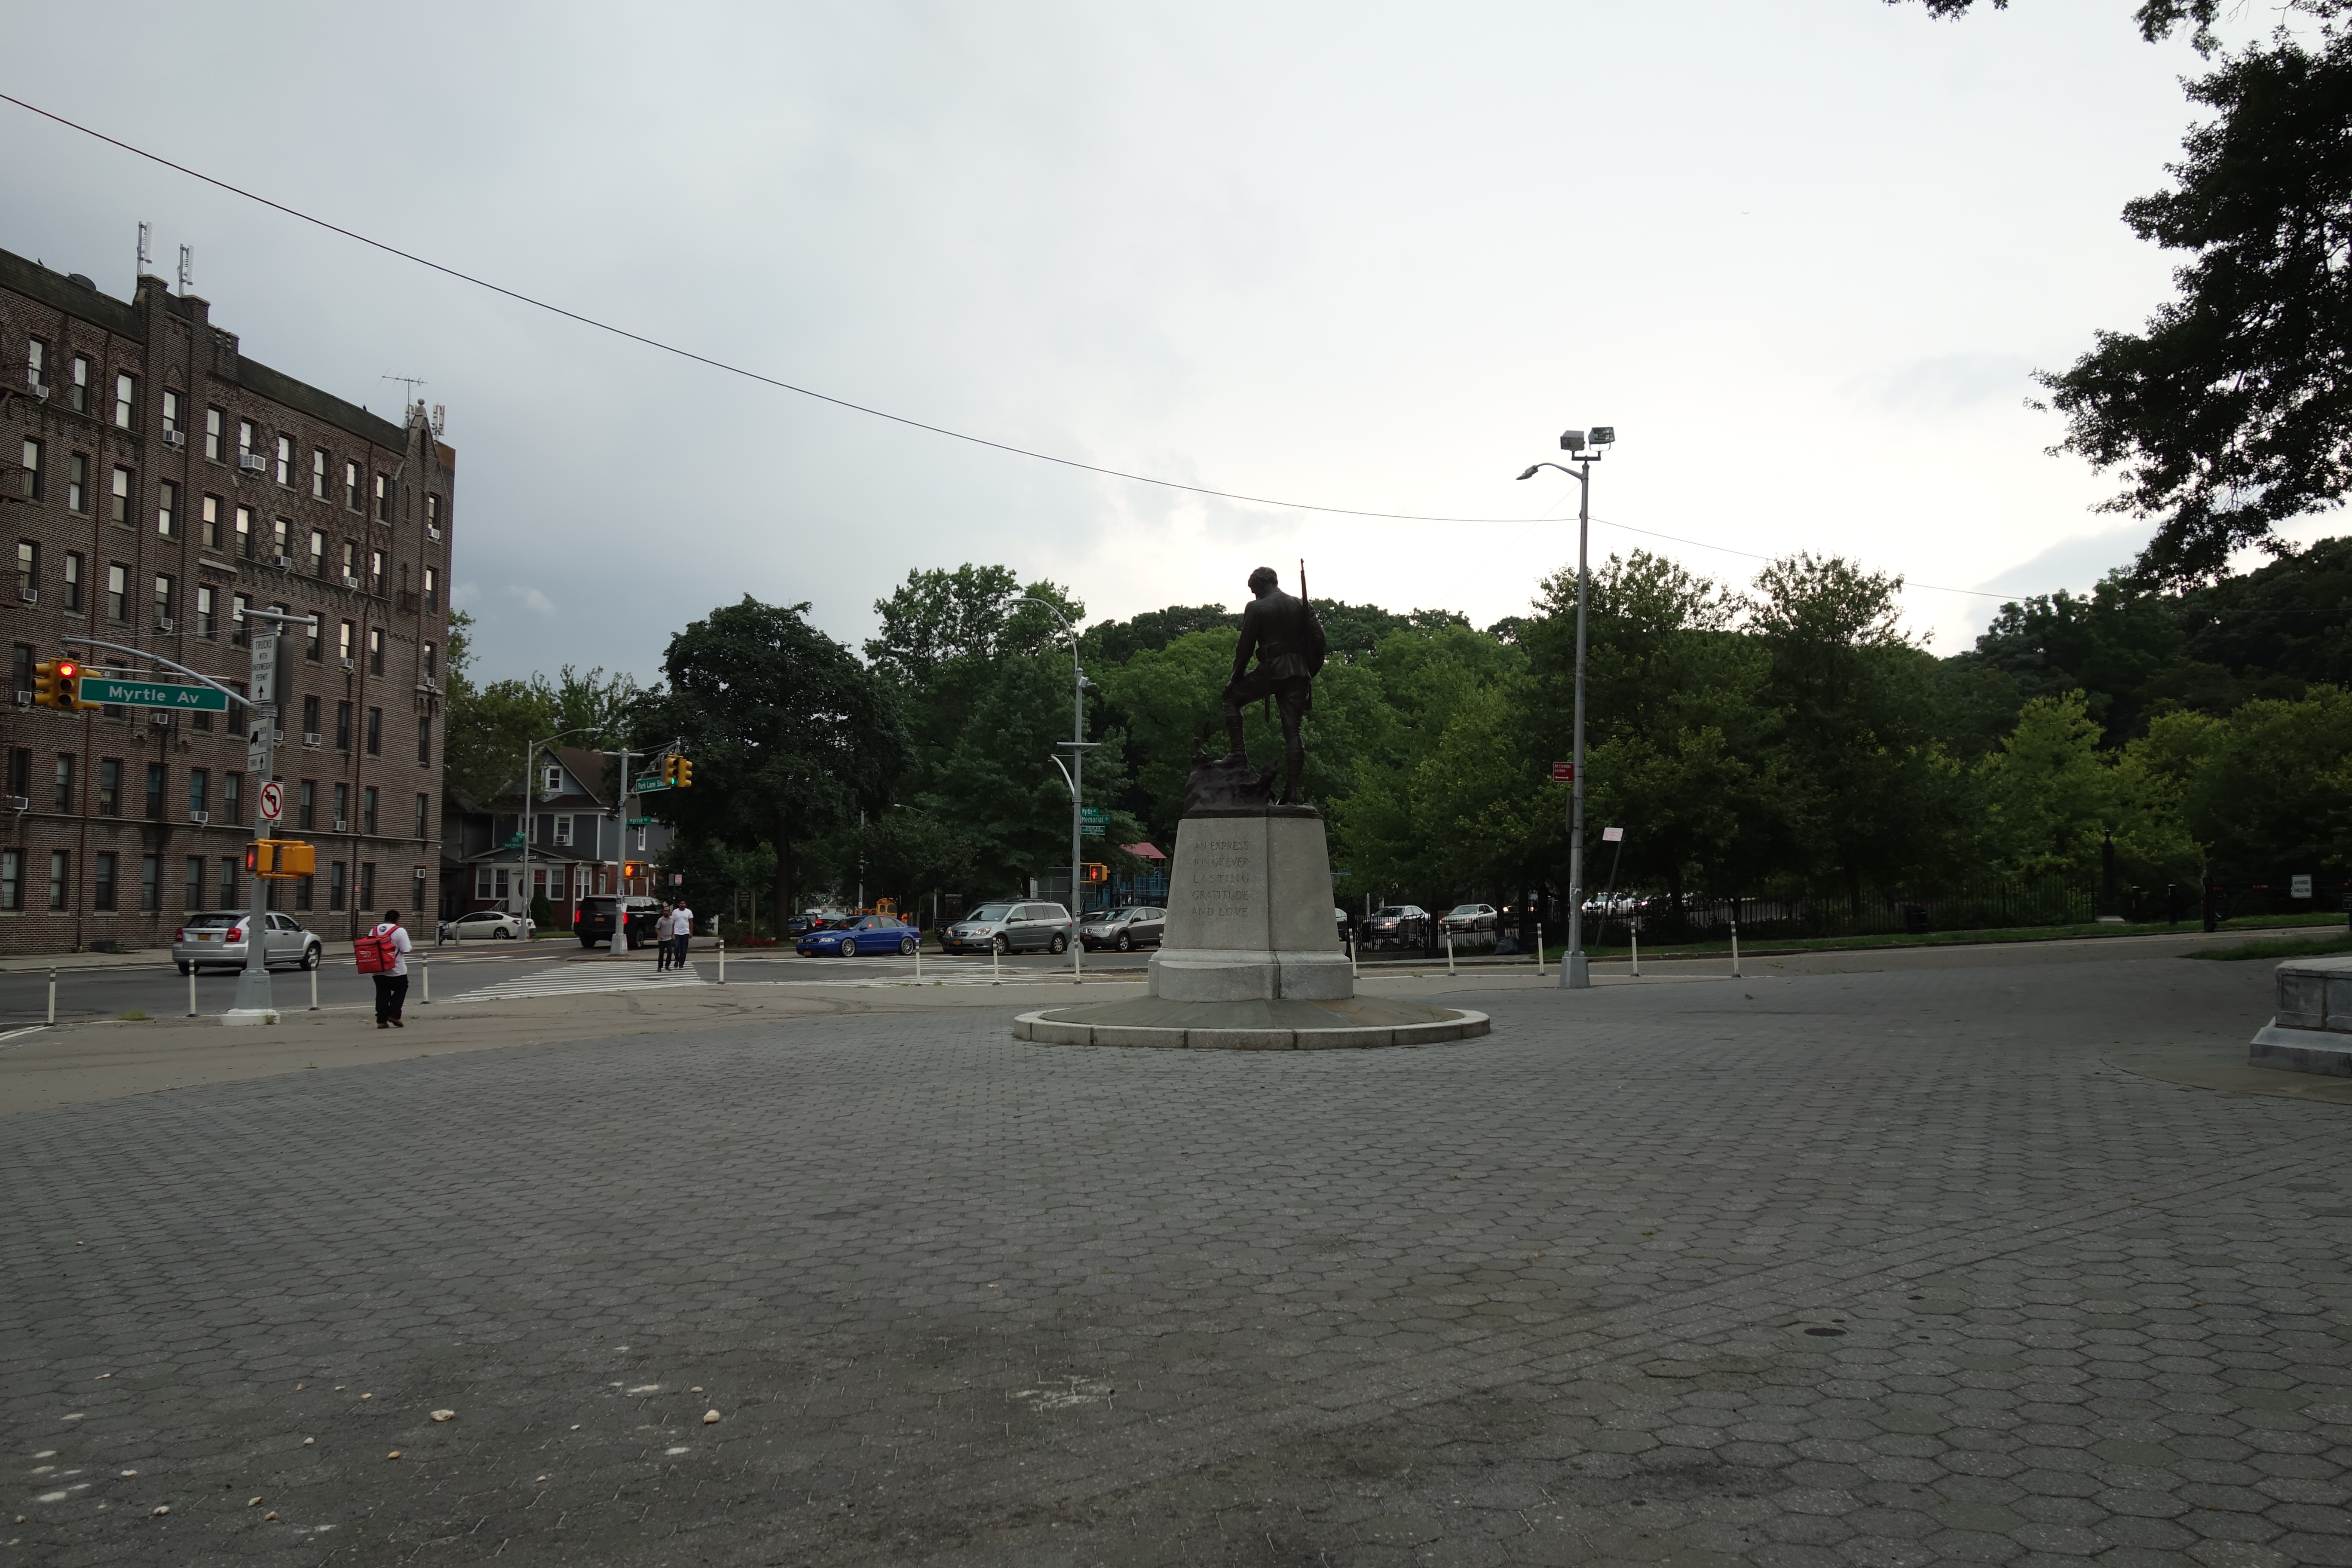 Forest Park Monuments - Richmond Hill War Memorial : NYC Parks